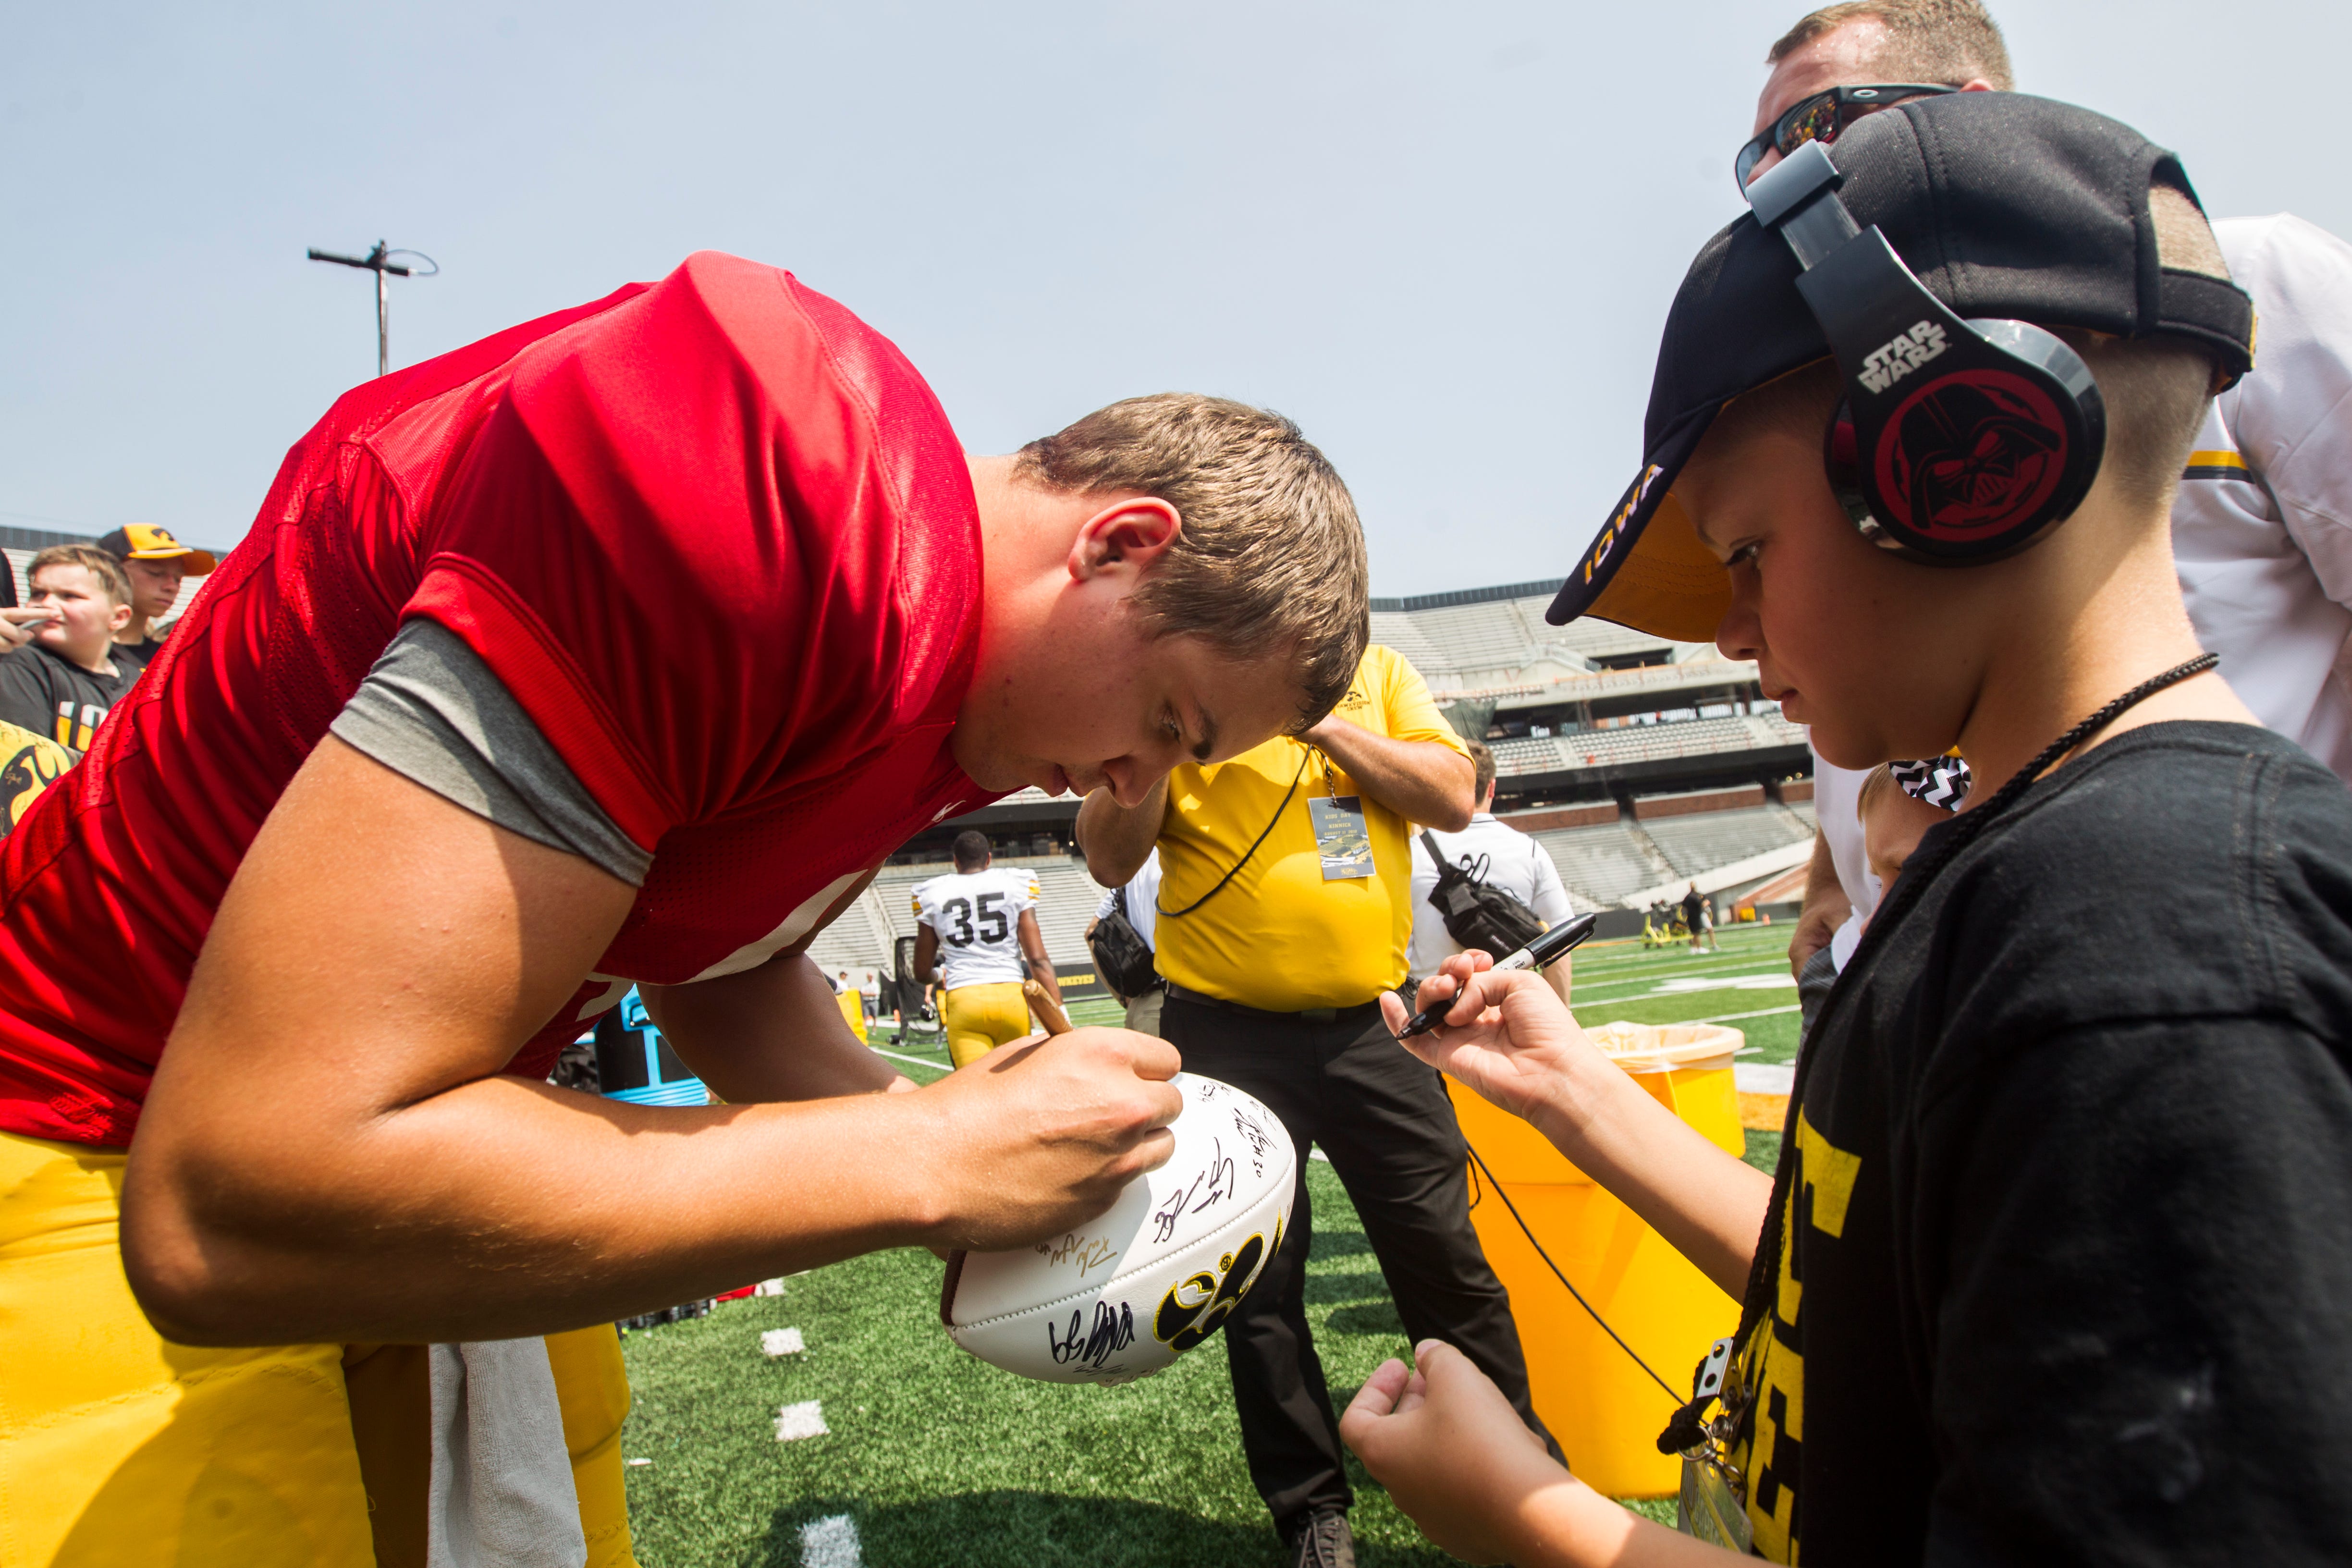 Iowa quarterback Nate Stanley signs a football for a fan during a Kids Day practice on Saturday, Aug. 11, 2018, at Kinnick Stadium in Iowa City.